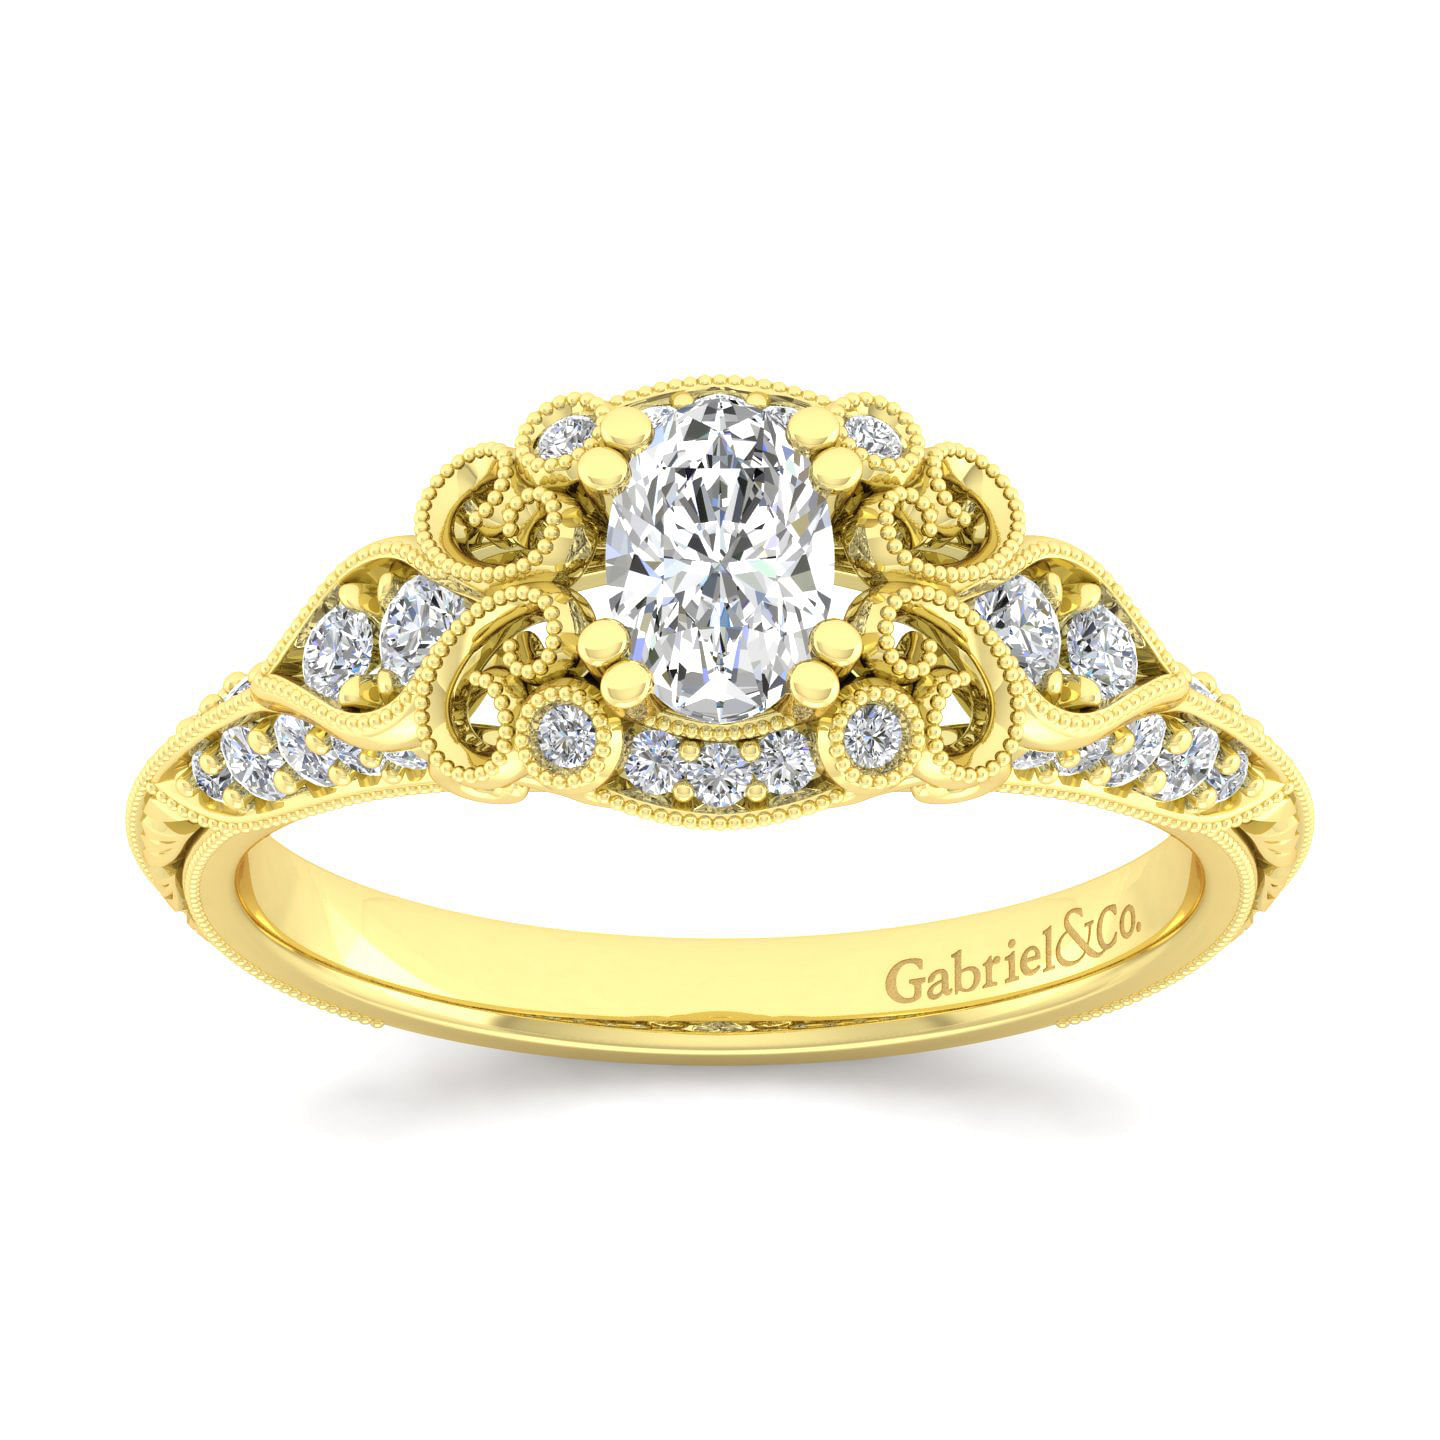 Unique 14K Yellow Gold Vintage Inspired Oval Diamond Halo Engagement Ring